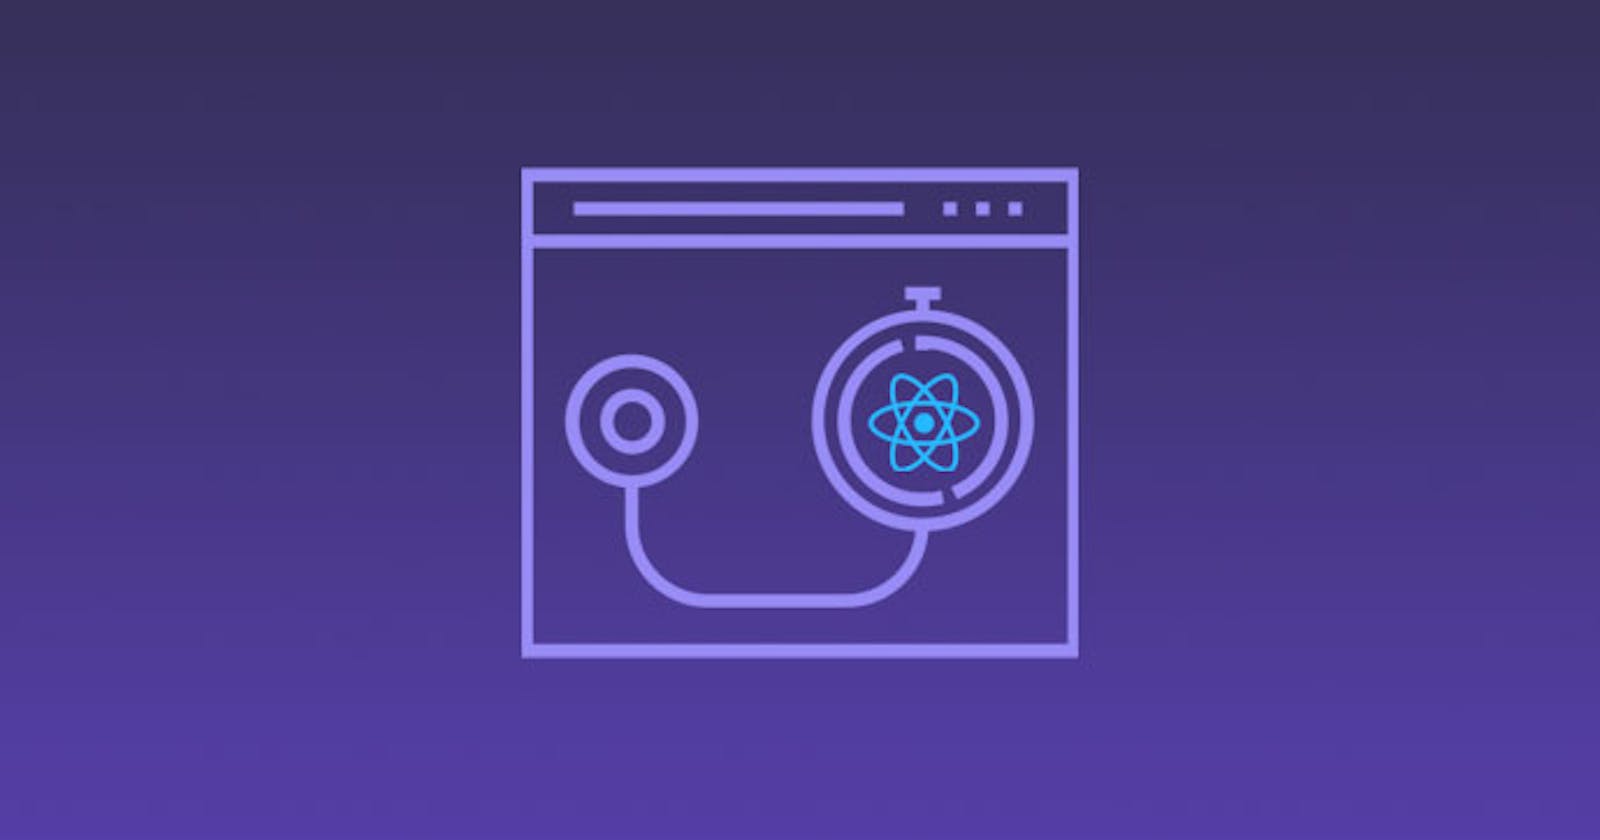 Unit testing react components using Enzyme and Jest testing frameworks